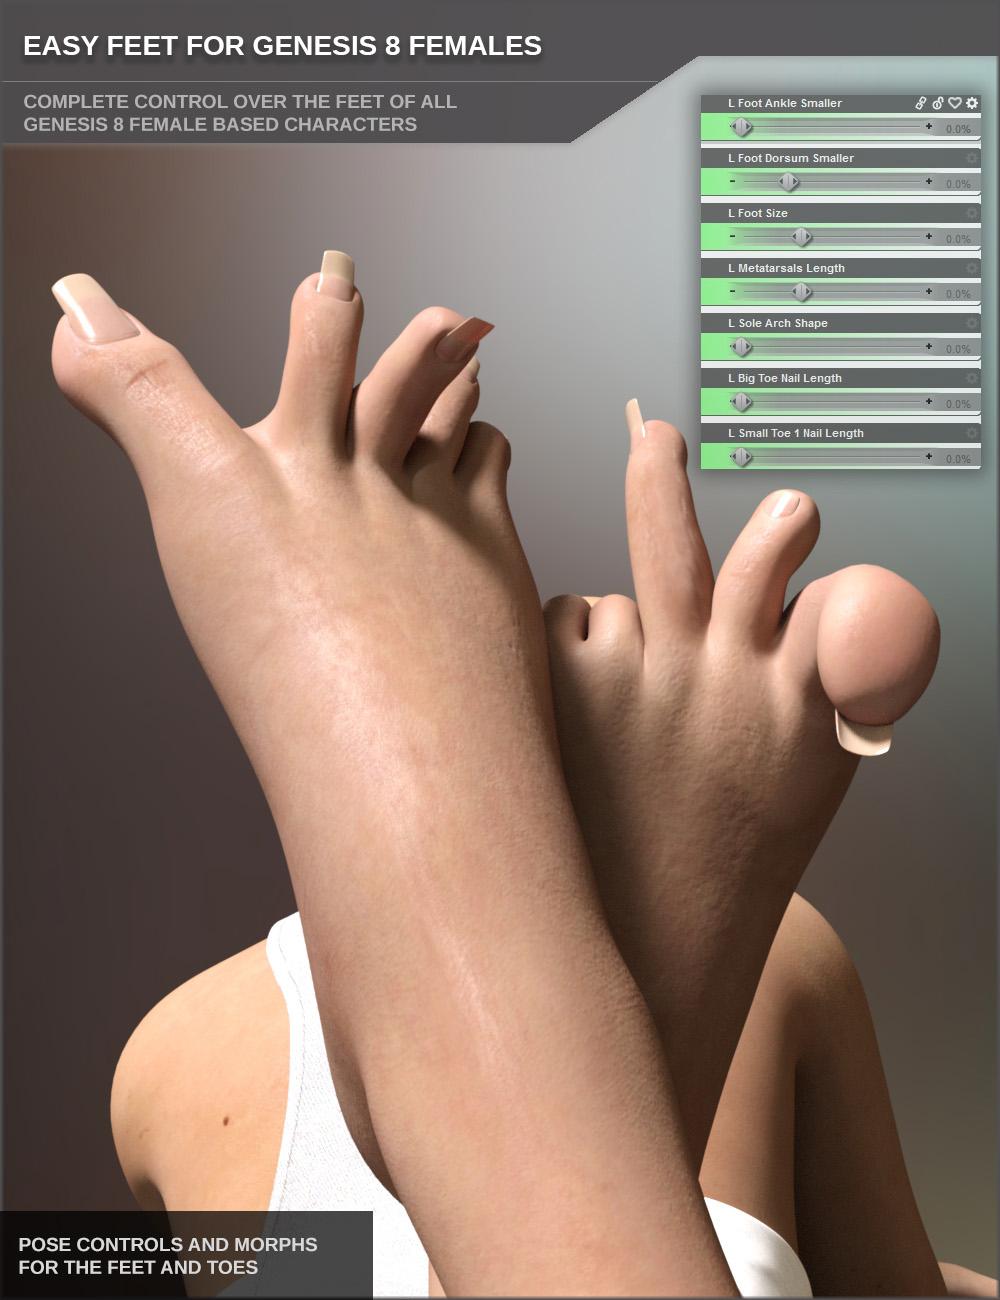 Released: Easy Feet - Pose Control and Morph Extension for Genesis 8  Females [commercial] - Daz 3D Forums